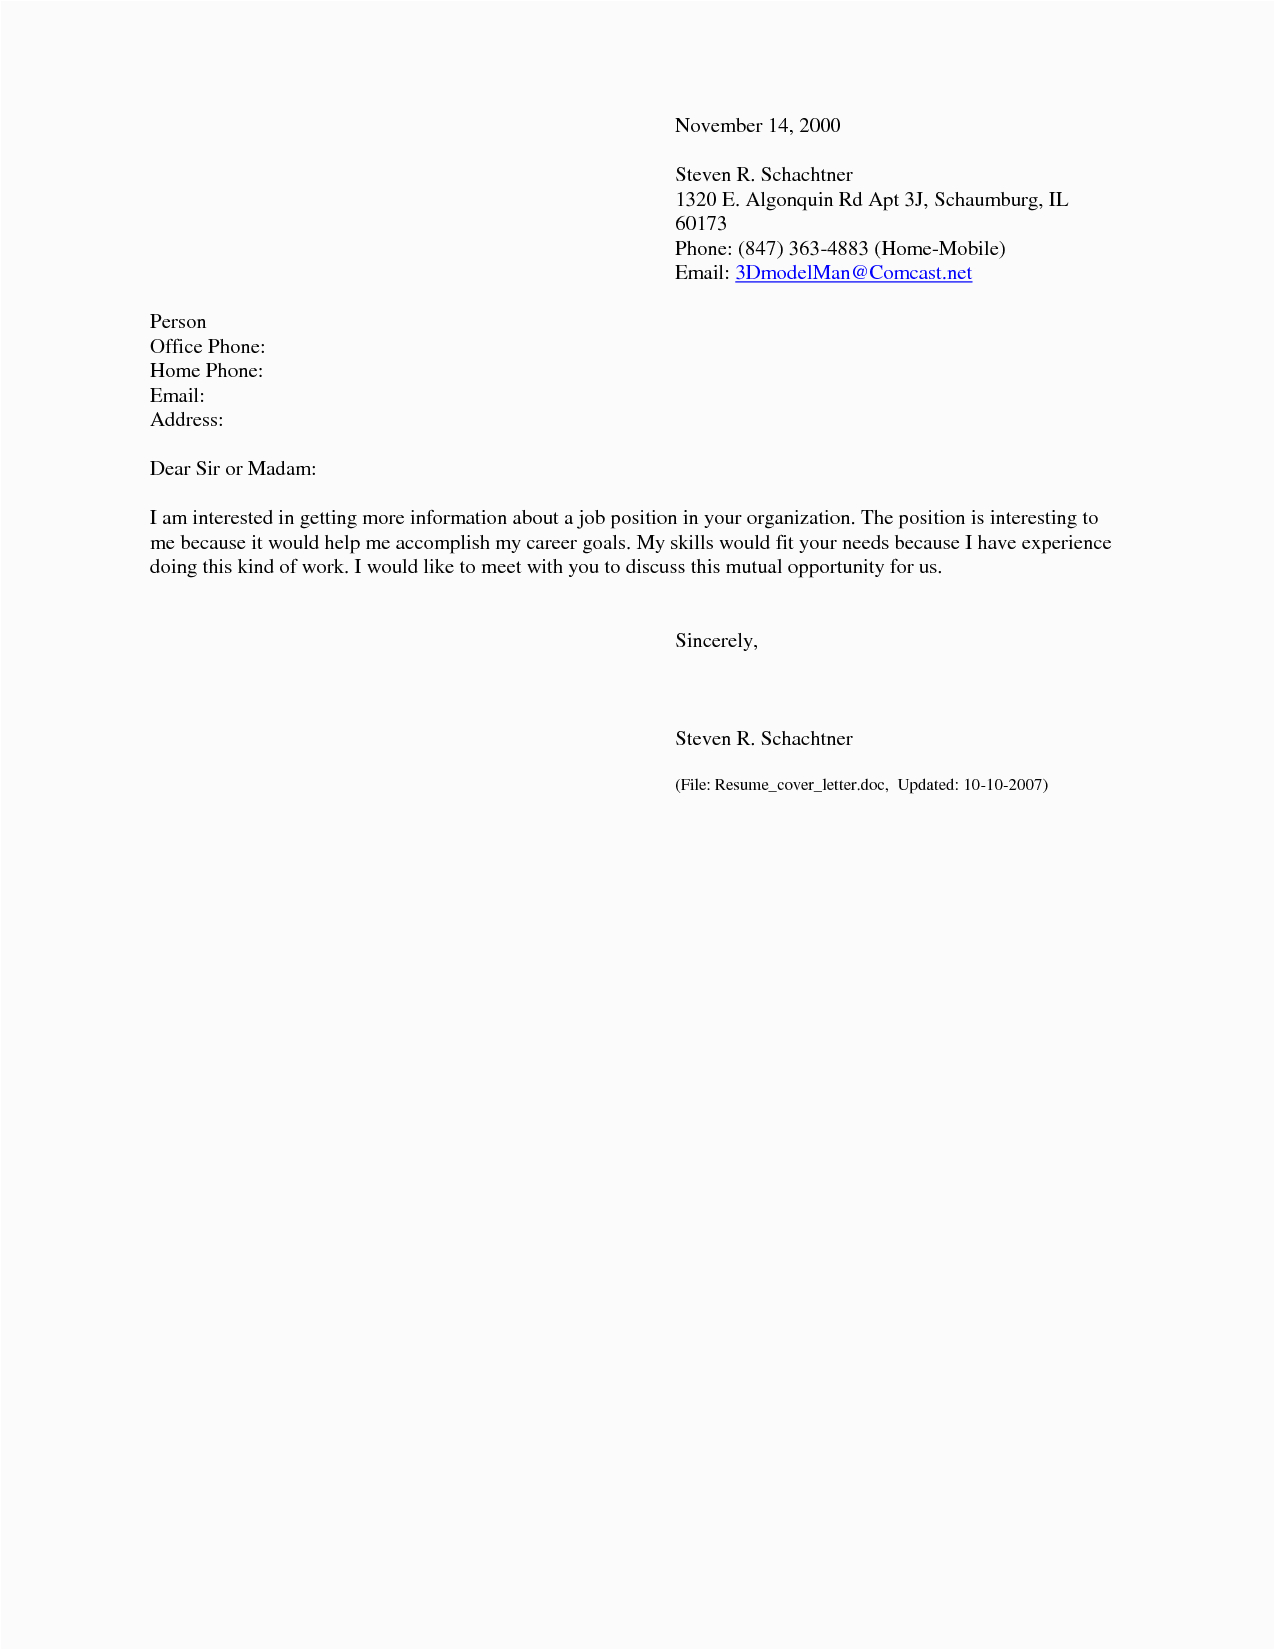 Email Cover Letter Resume attached Sample Cover Letter for Emailing Resume Database